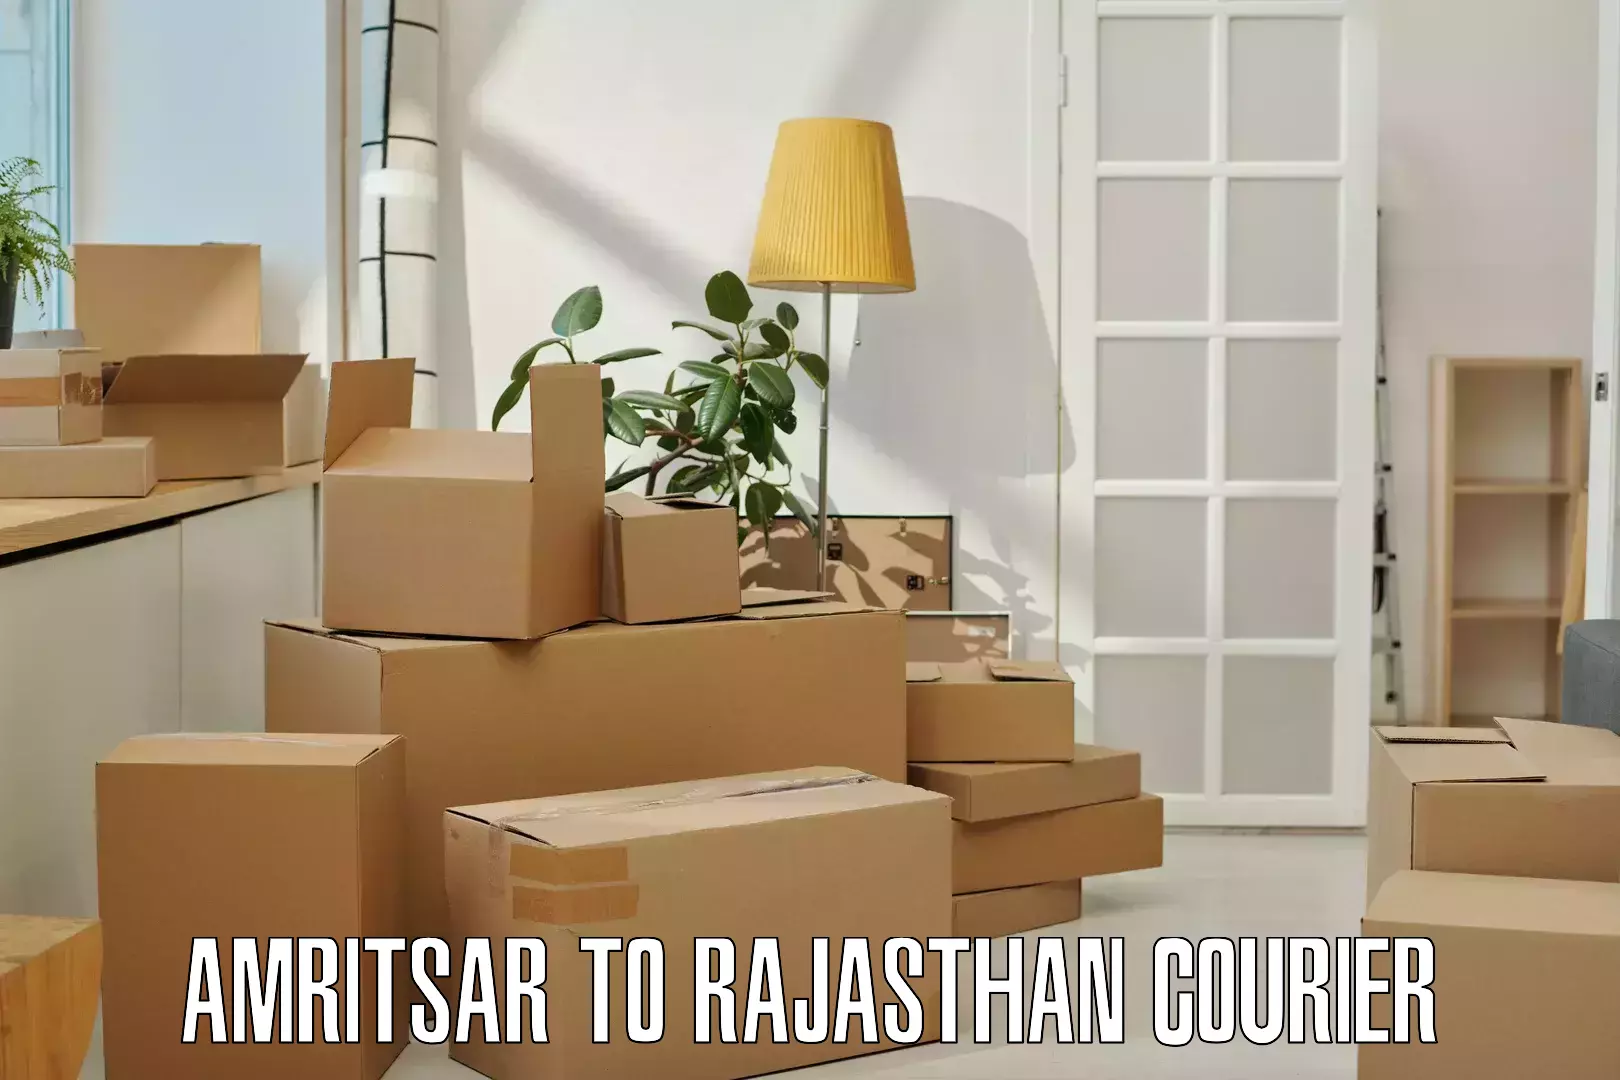 Package delivery network Amritsar to Keshoraipatan